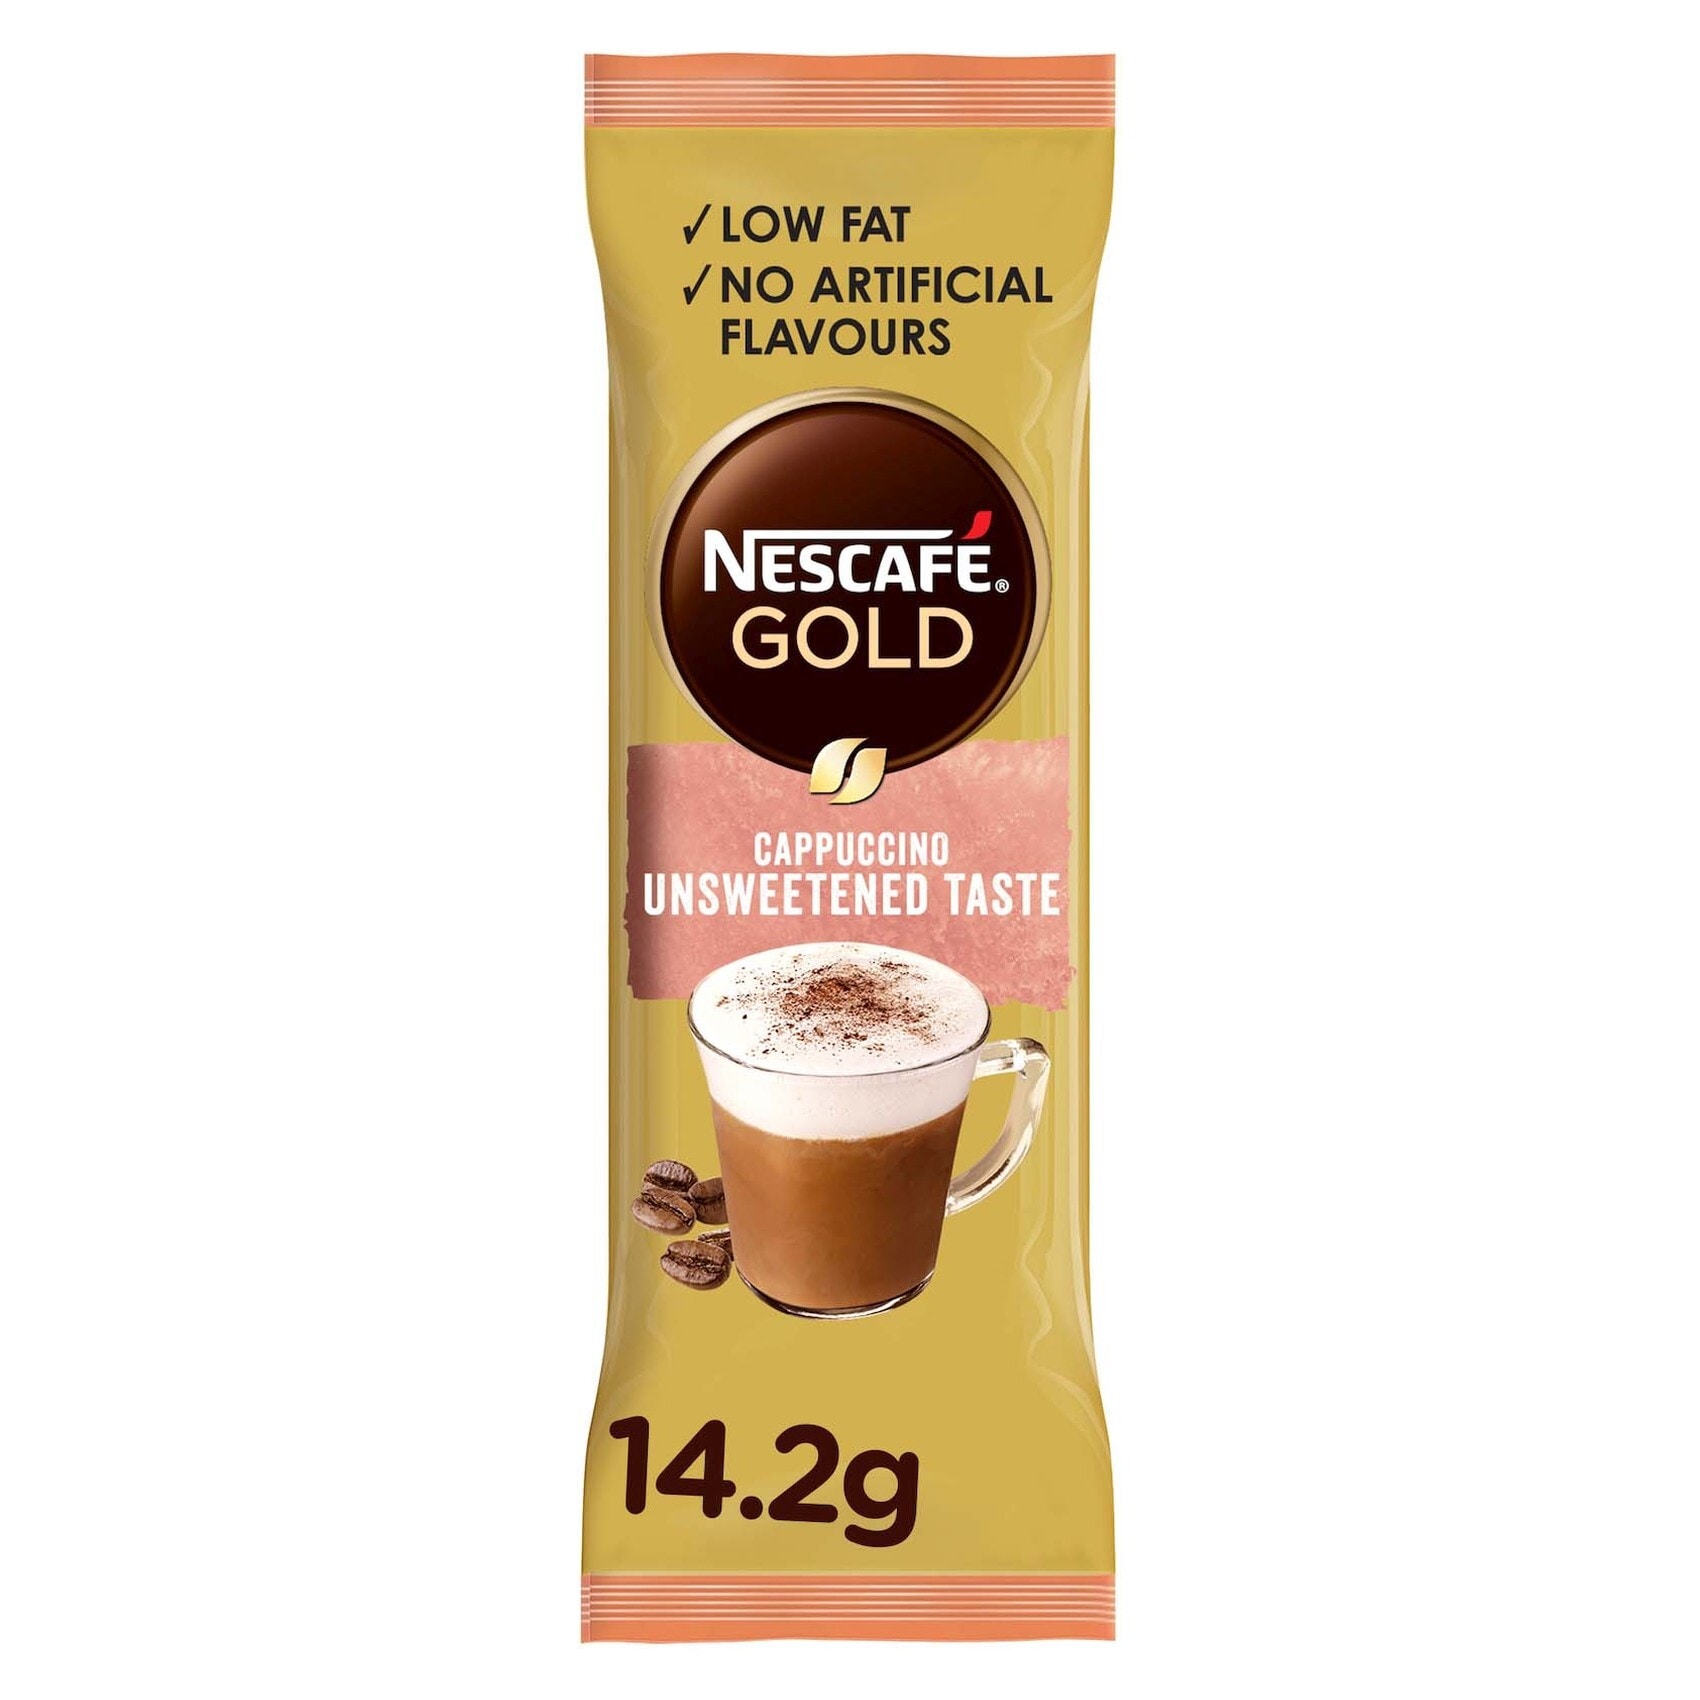 Buy Nescafe Gold Cappuccino Unsweetened 14.2 g Online in UAE